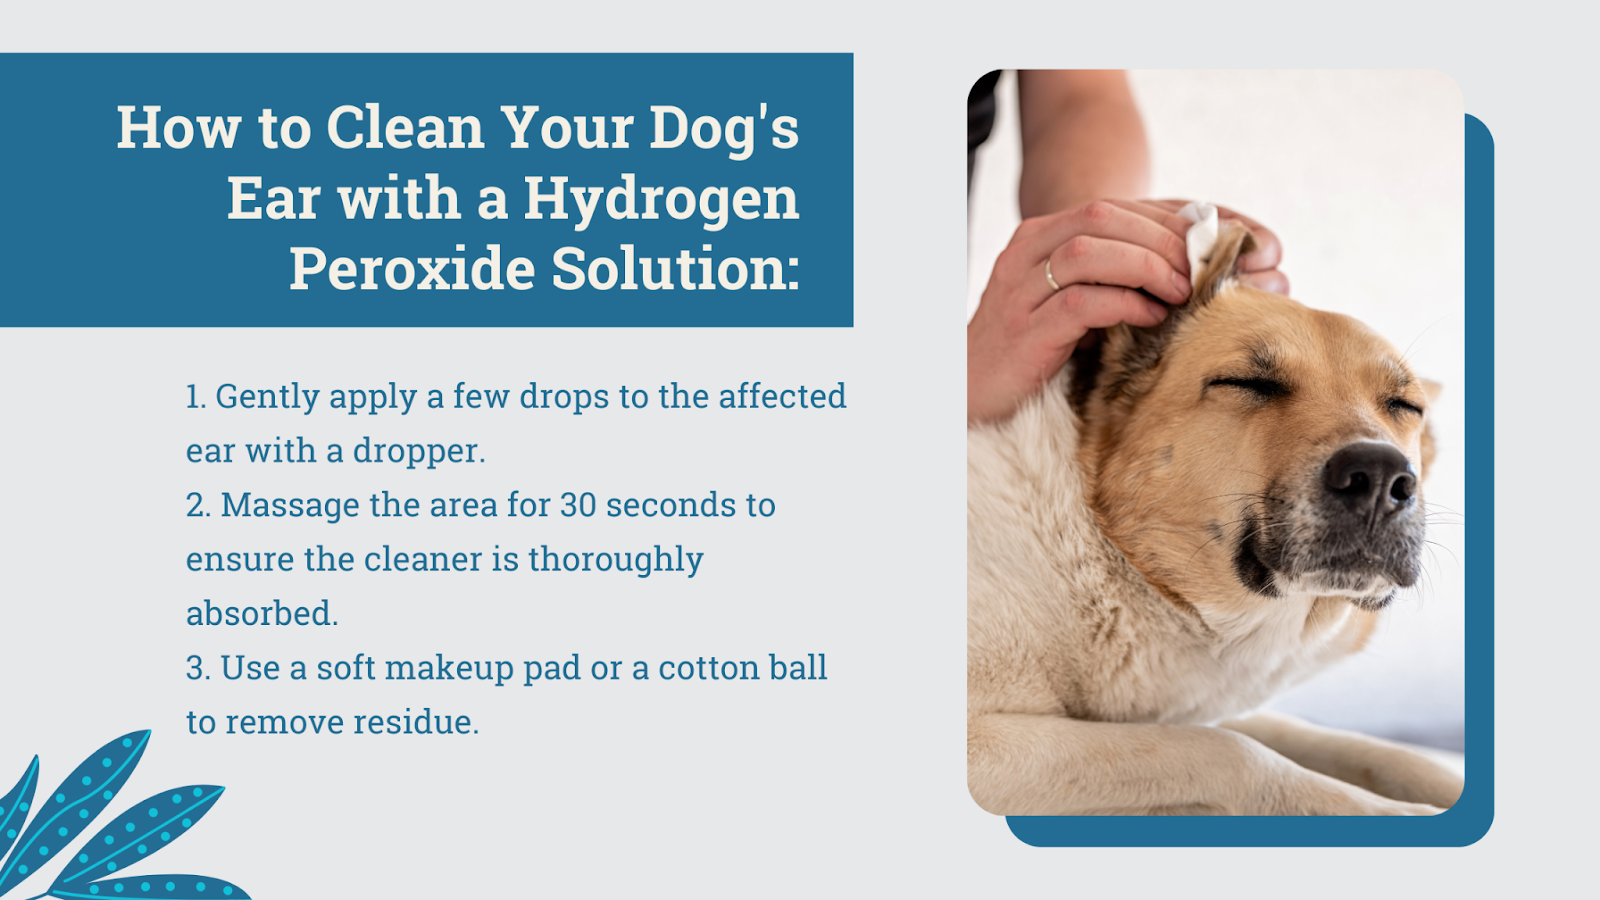 How to clean your dog's ear with a hydrogen peroxide solution